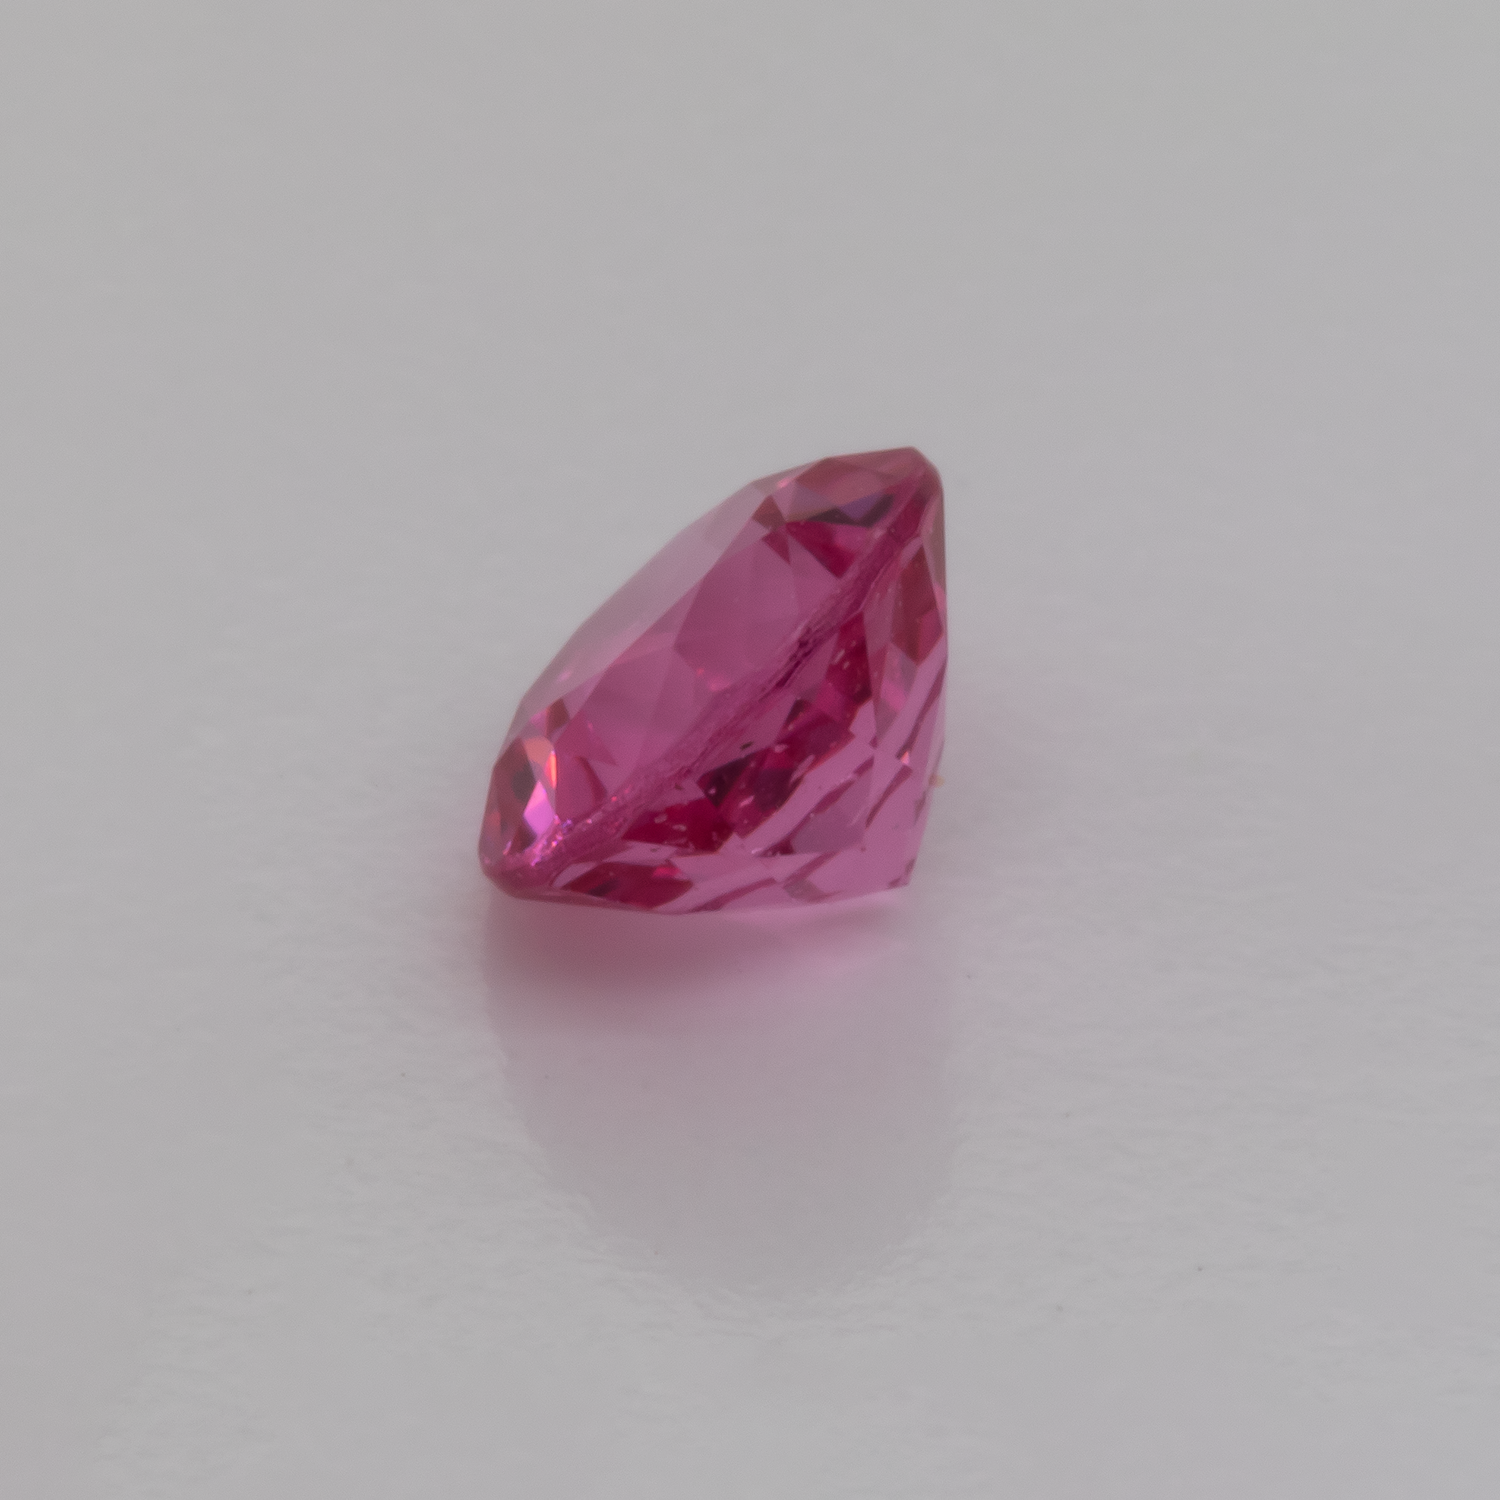 Spinell - rosa, rund, 4,7x4,7 mm, 0,49 cts, Nr. SP90023